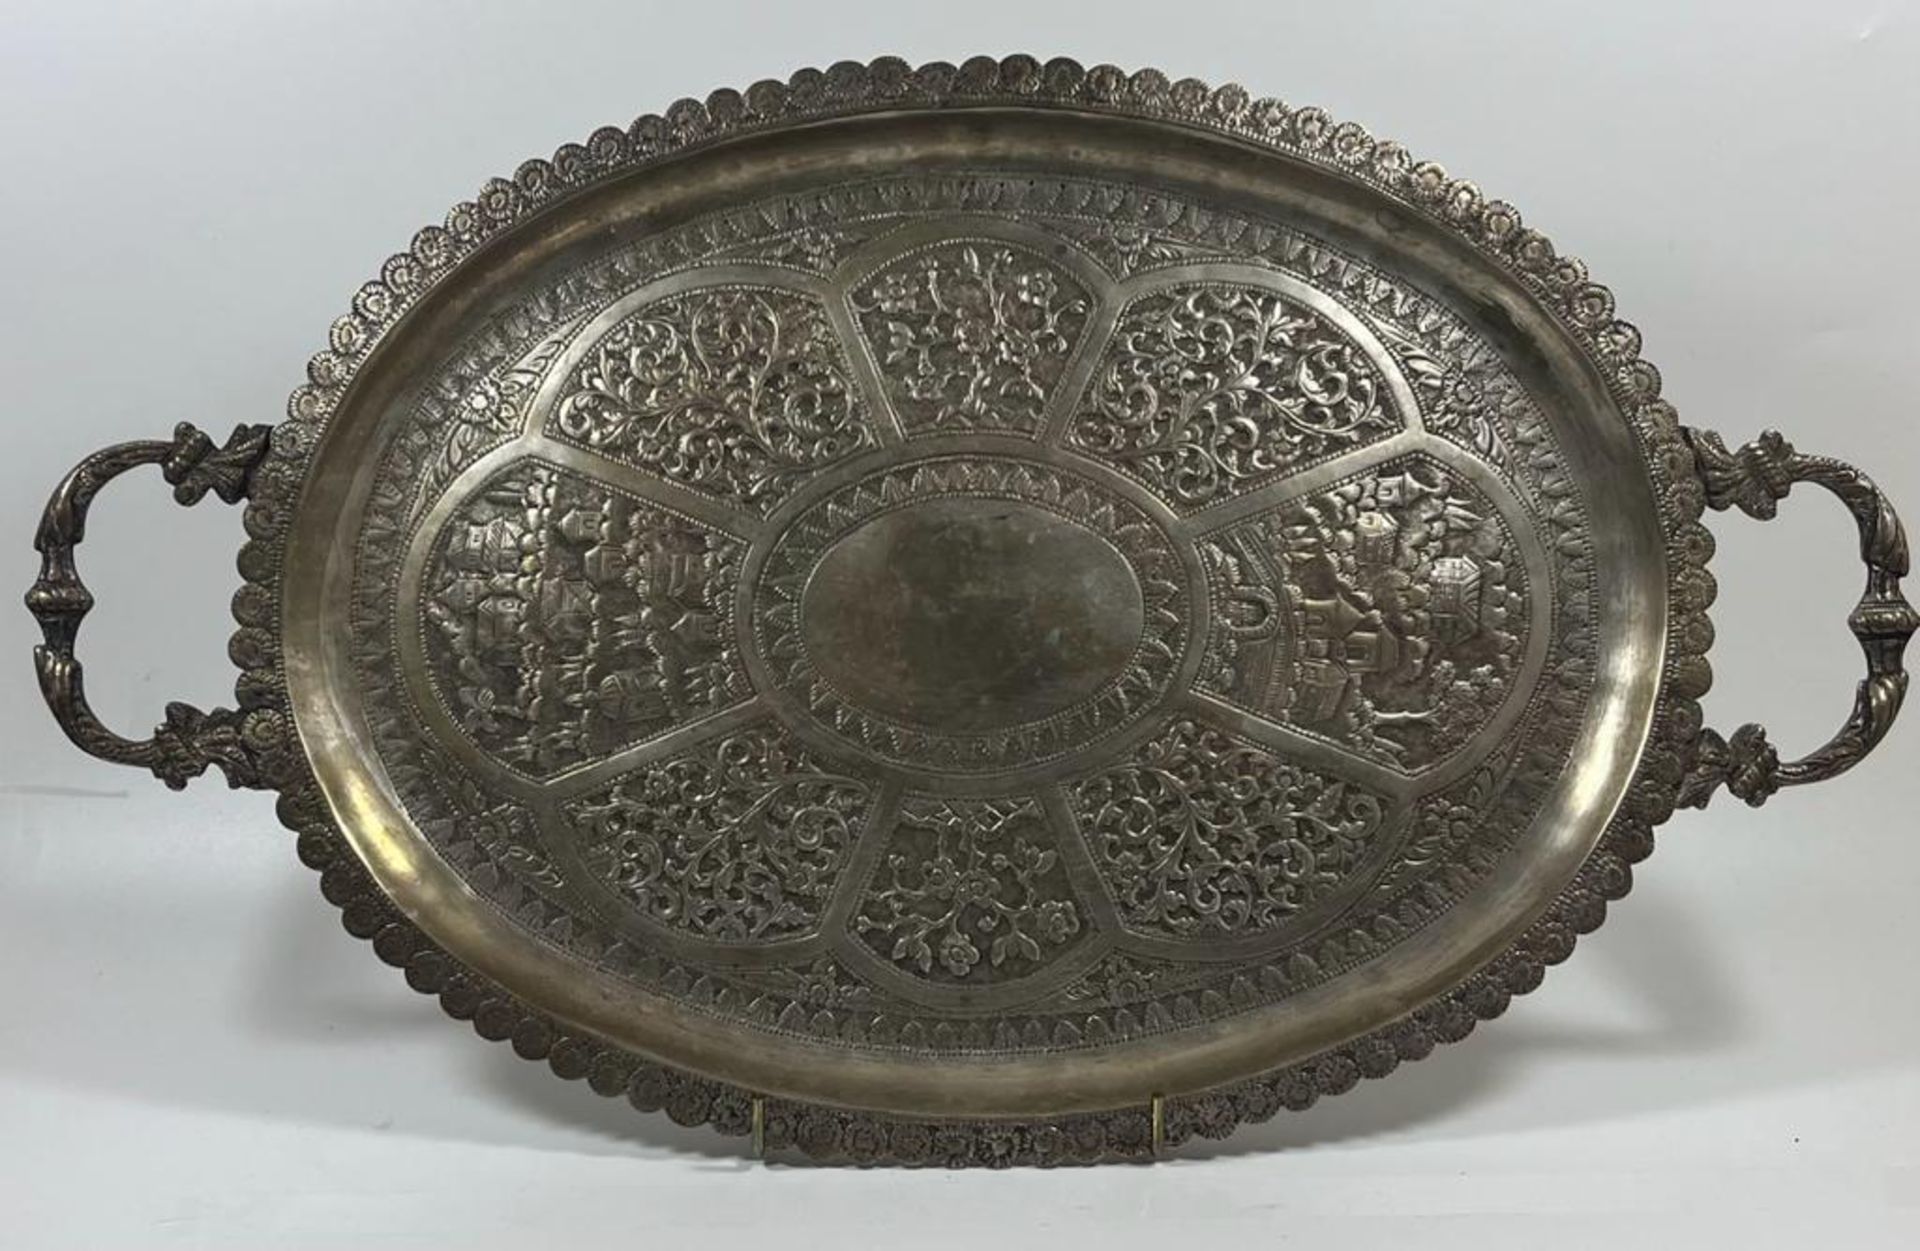 A LARGE POSSIBLY INDIAN TWIN HANDLED WHITE METAL TRAY, UNMARKED BUT LOOKS FINE QUALITY, LENGTH 47 CM